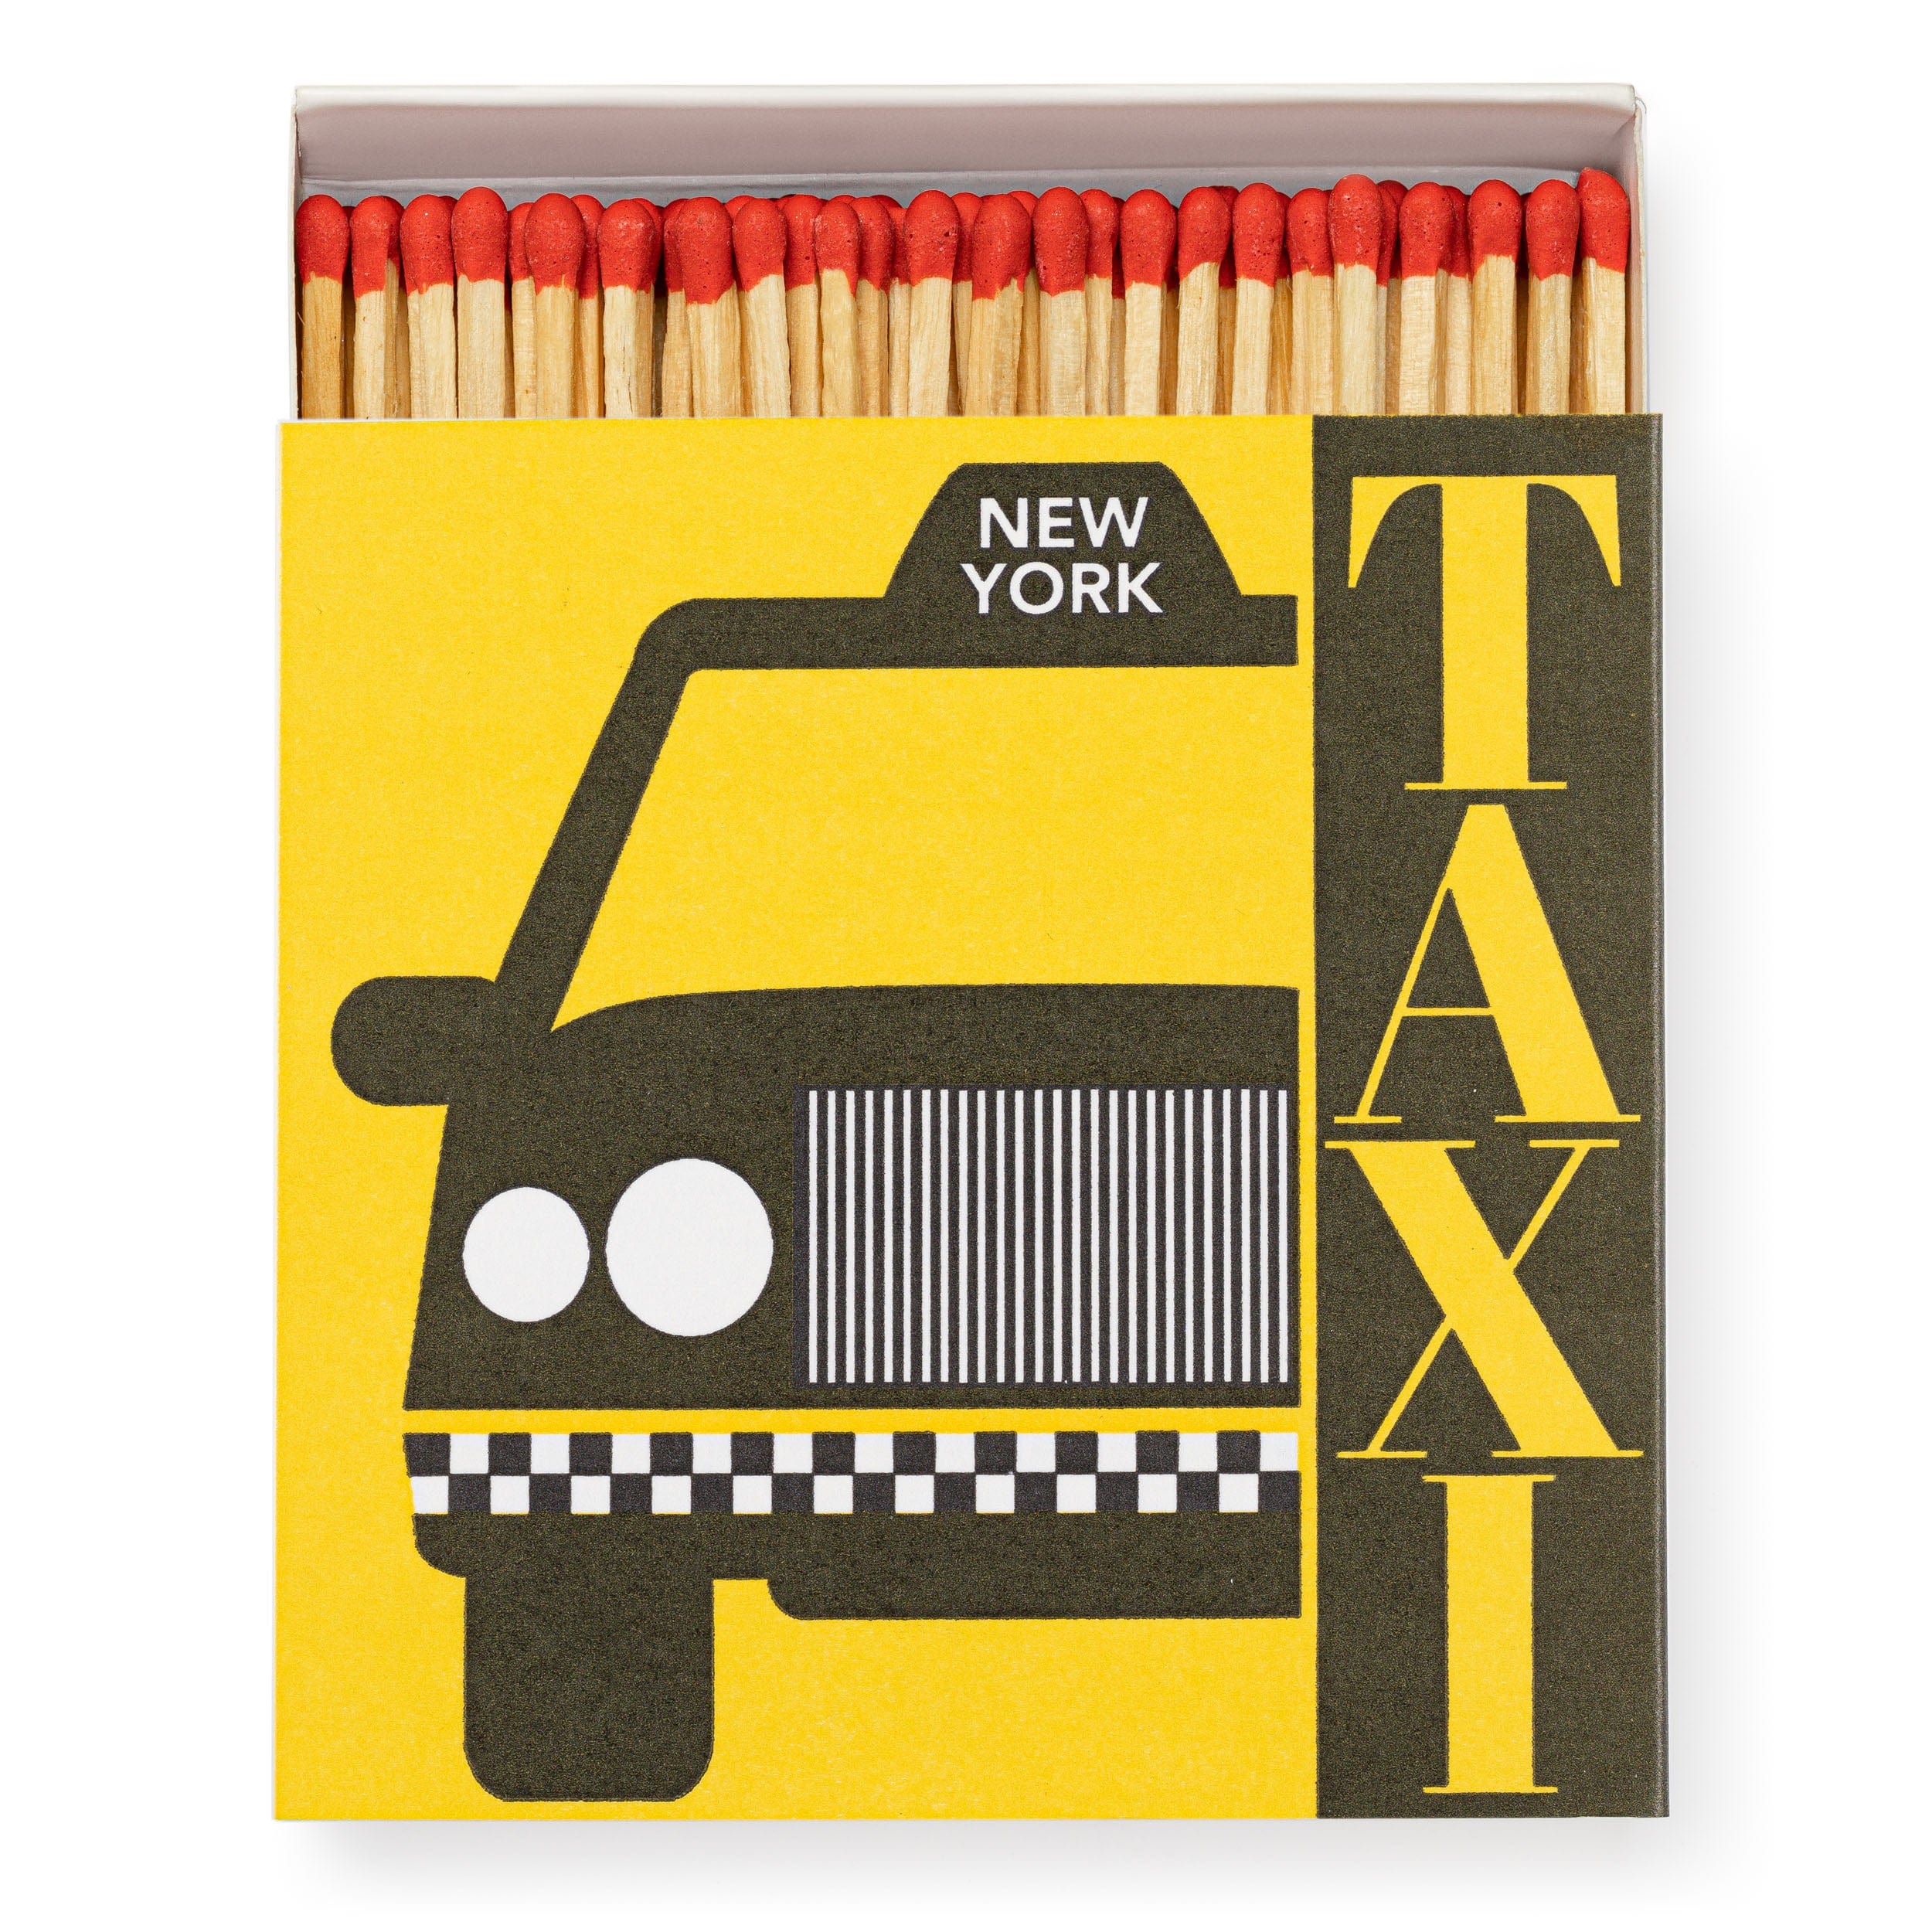 Square Luxury Match Box NYC Taxi